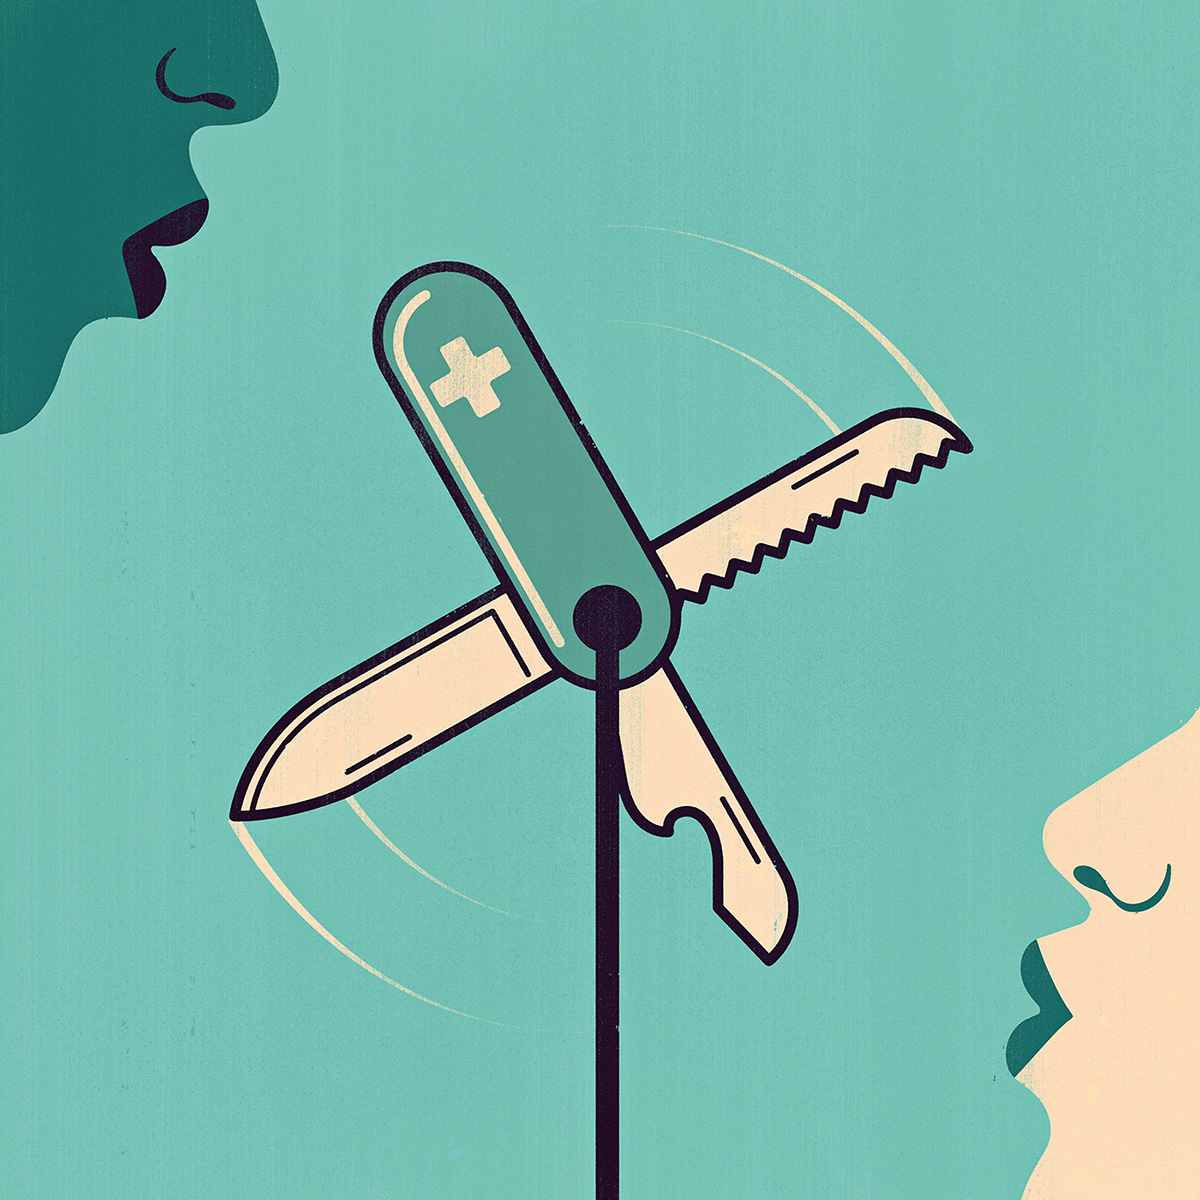 Illustration of two people that blow on a Swiss knife shaped like a pinwheel